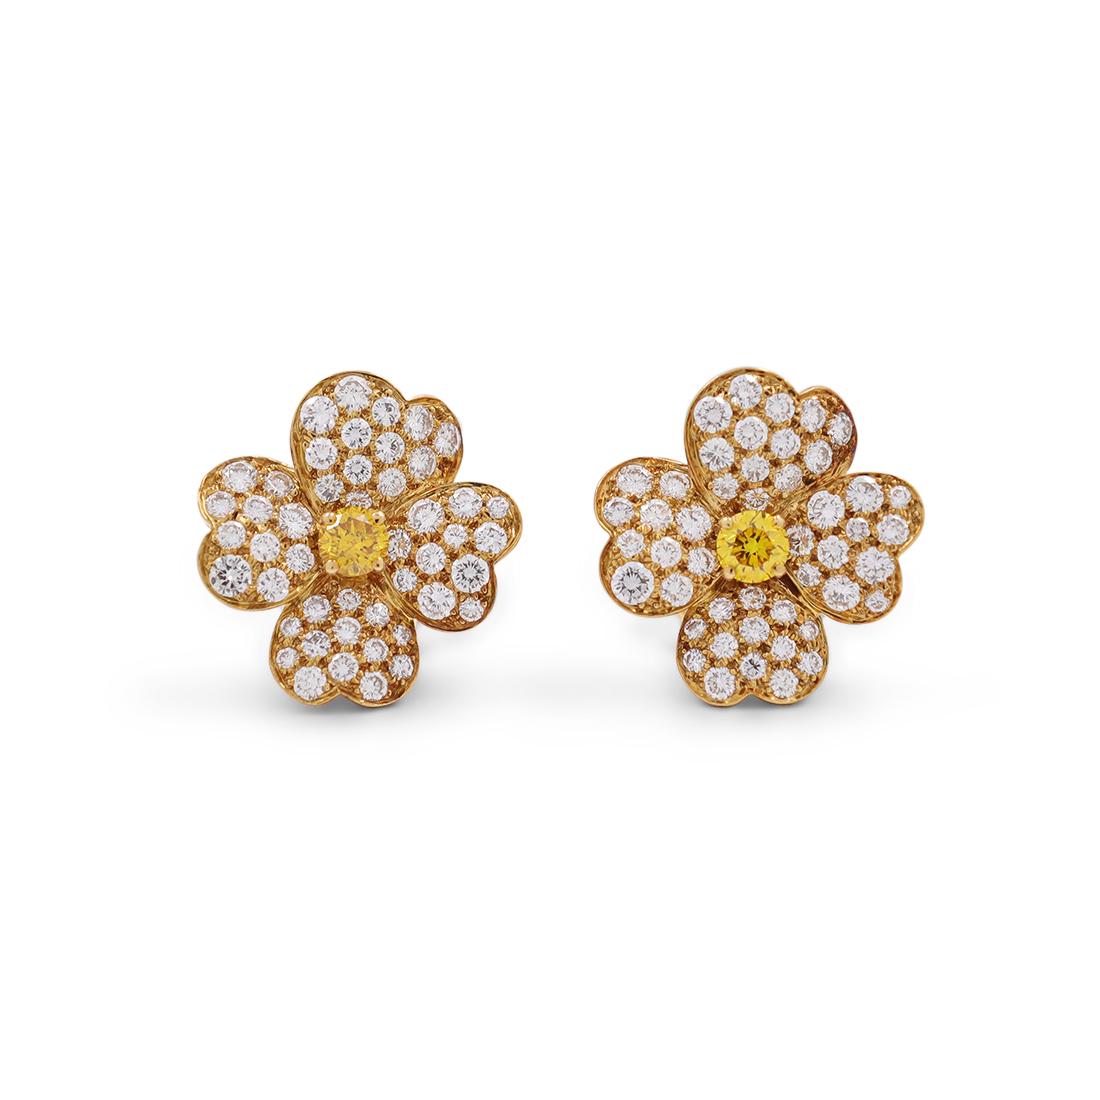 Authentic Van Cleef & Arpels 'Cosmos' earrings crafted in 18 karat yellow gold.  Each earring's four heart-shaped petals are set with round brilliant cut diamonds weighing an estimated 2.80 carats for the pair.  The center of each earring is